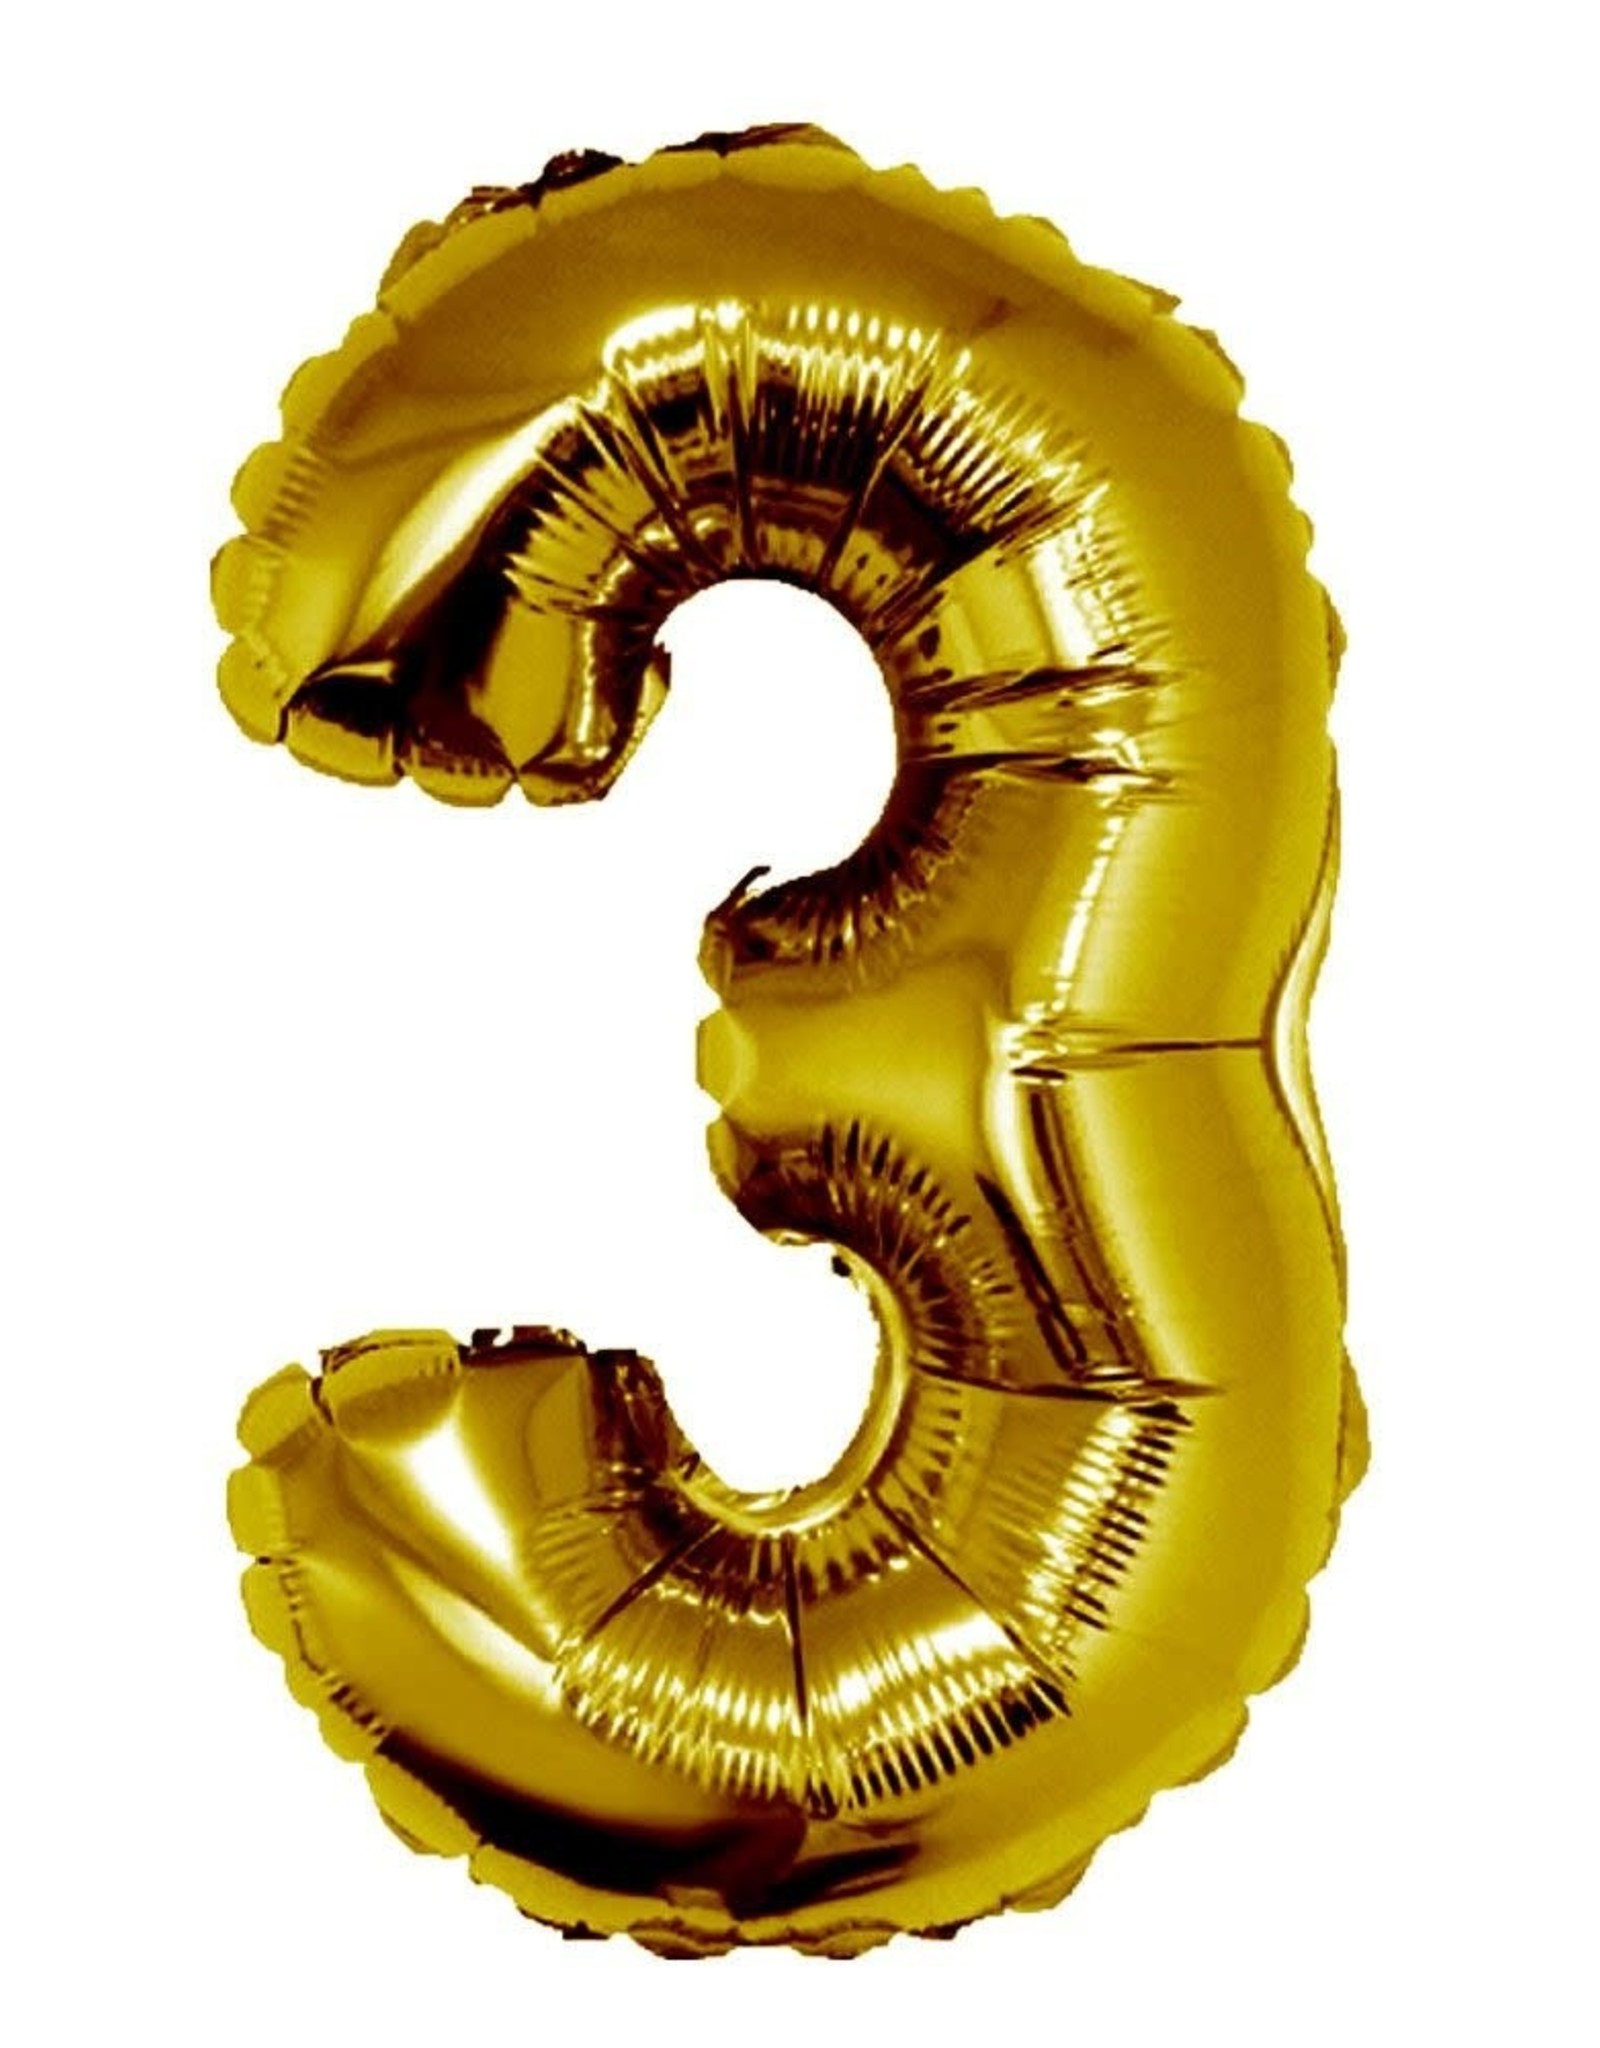 34" Gold Mylar Number Balloons